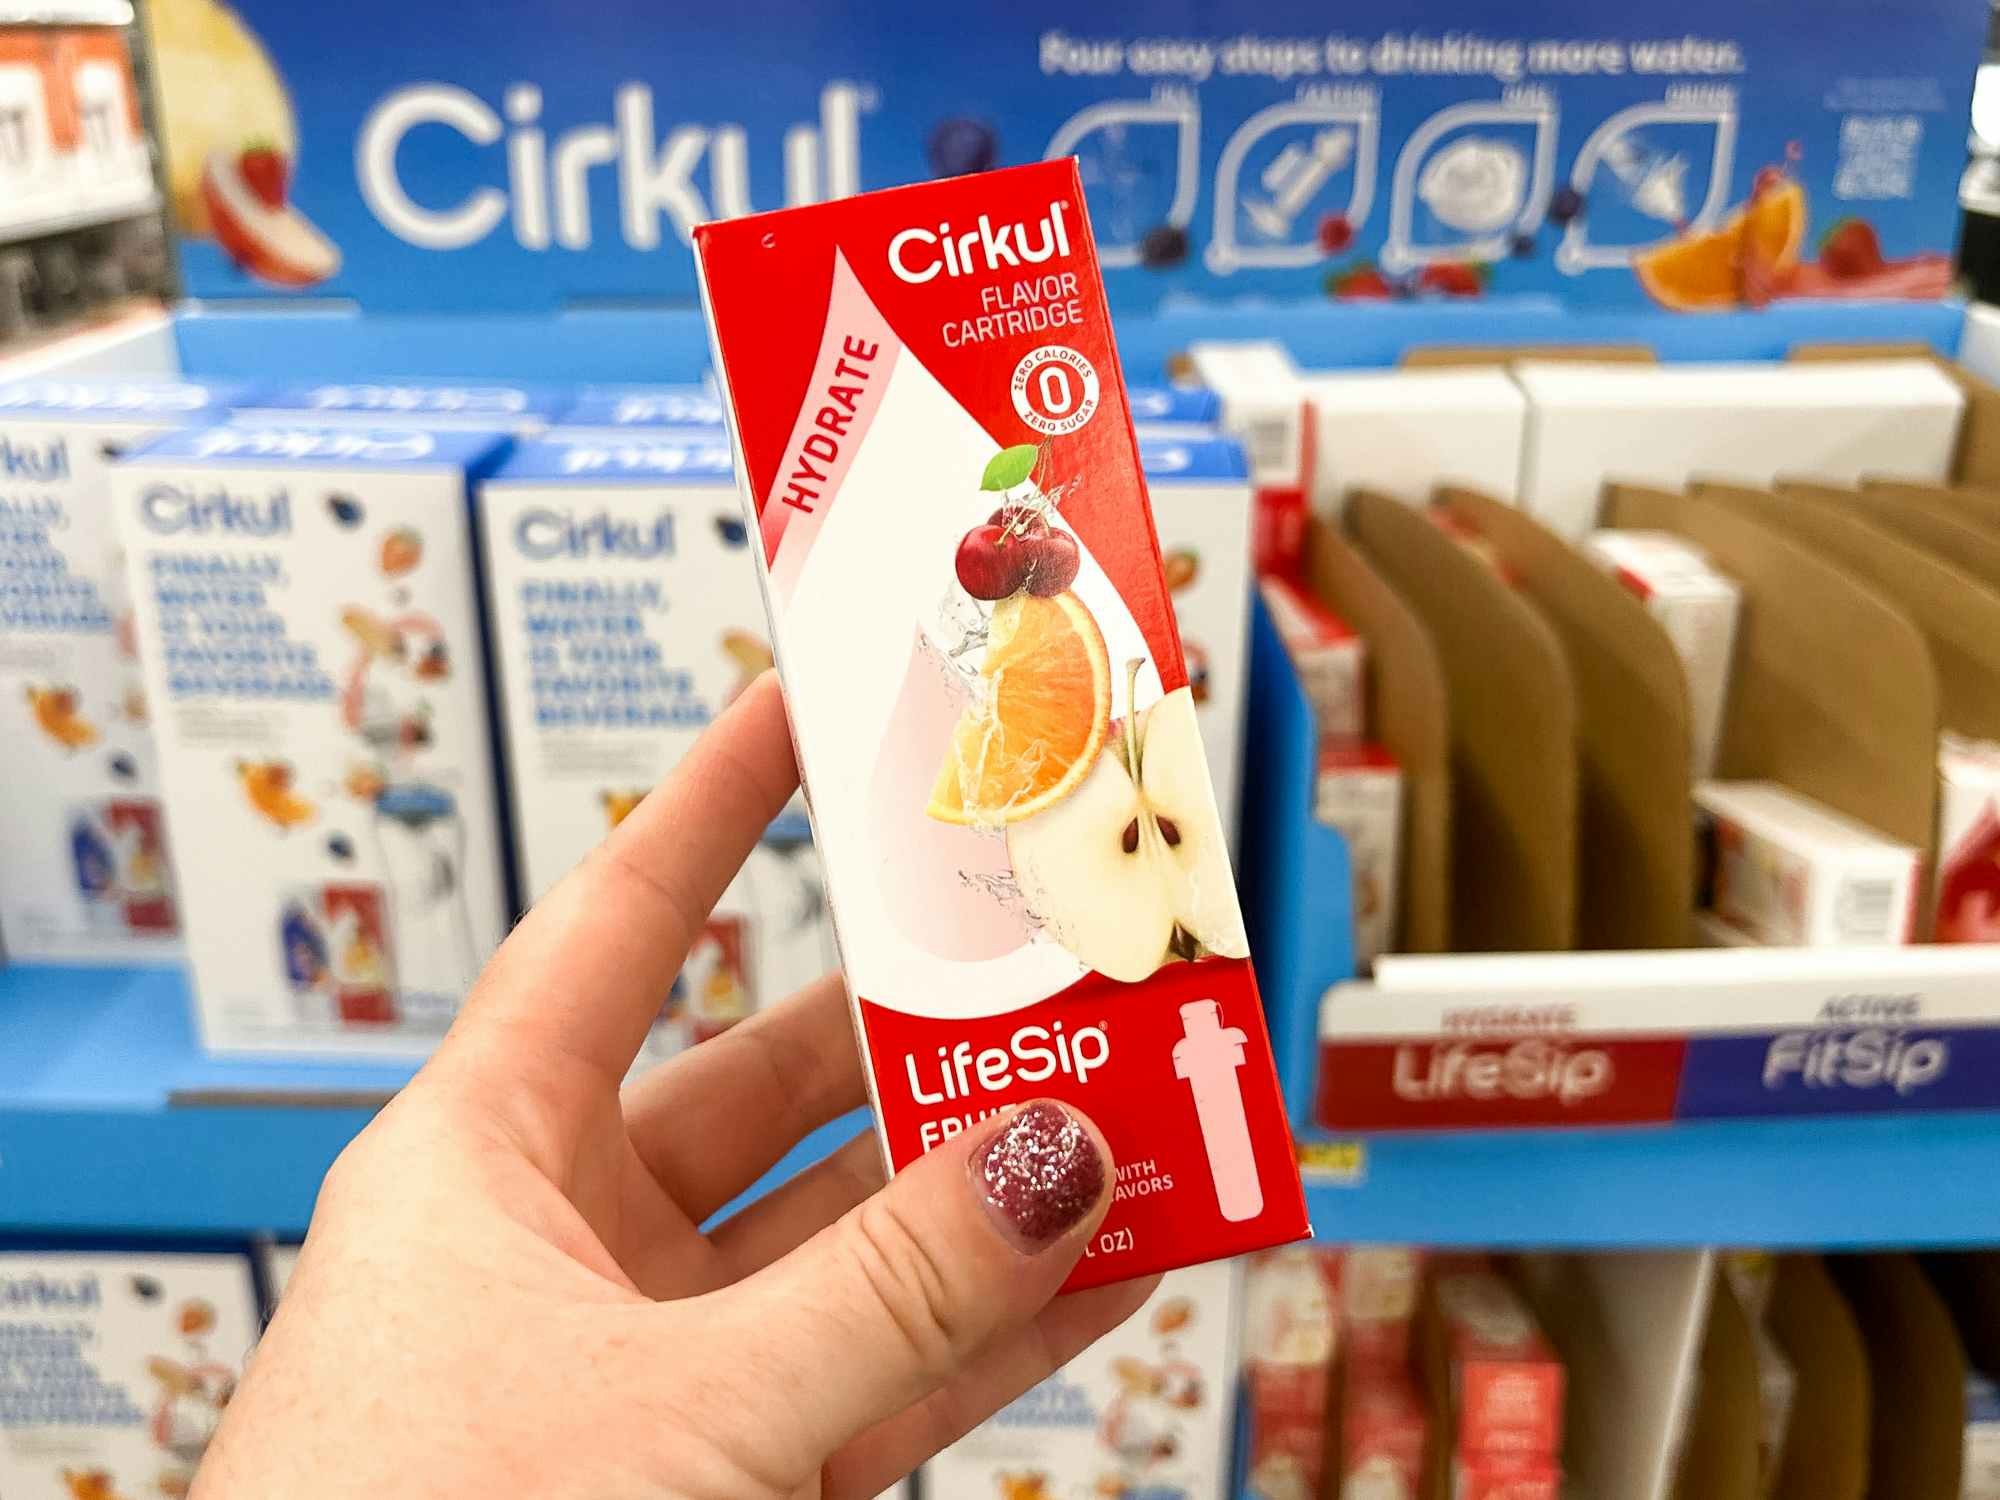 Someone holding up a Cirkul flavor box in a Walmart store